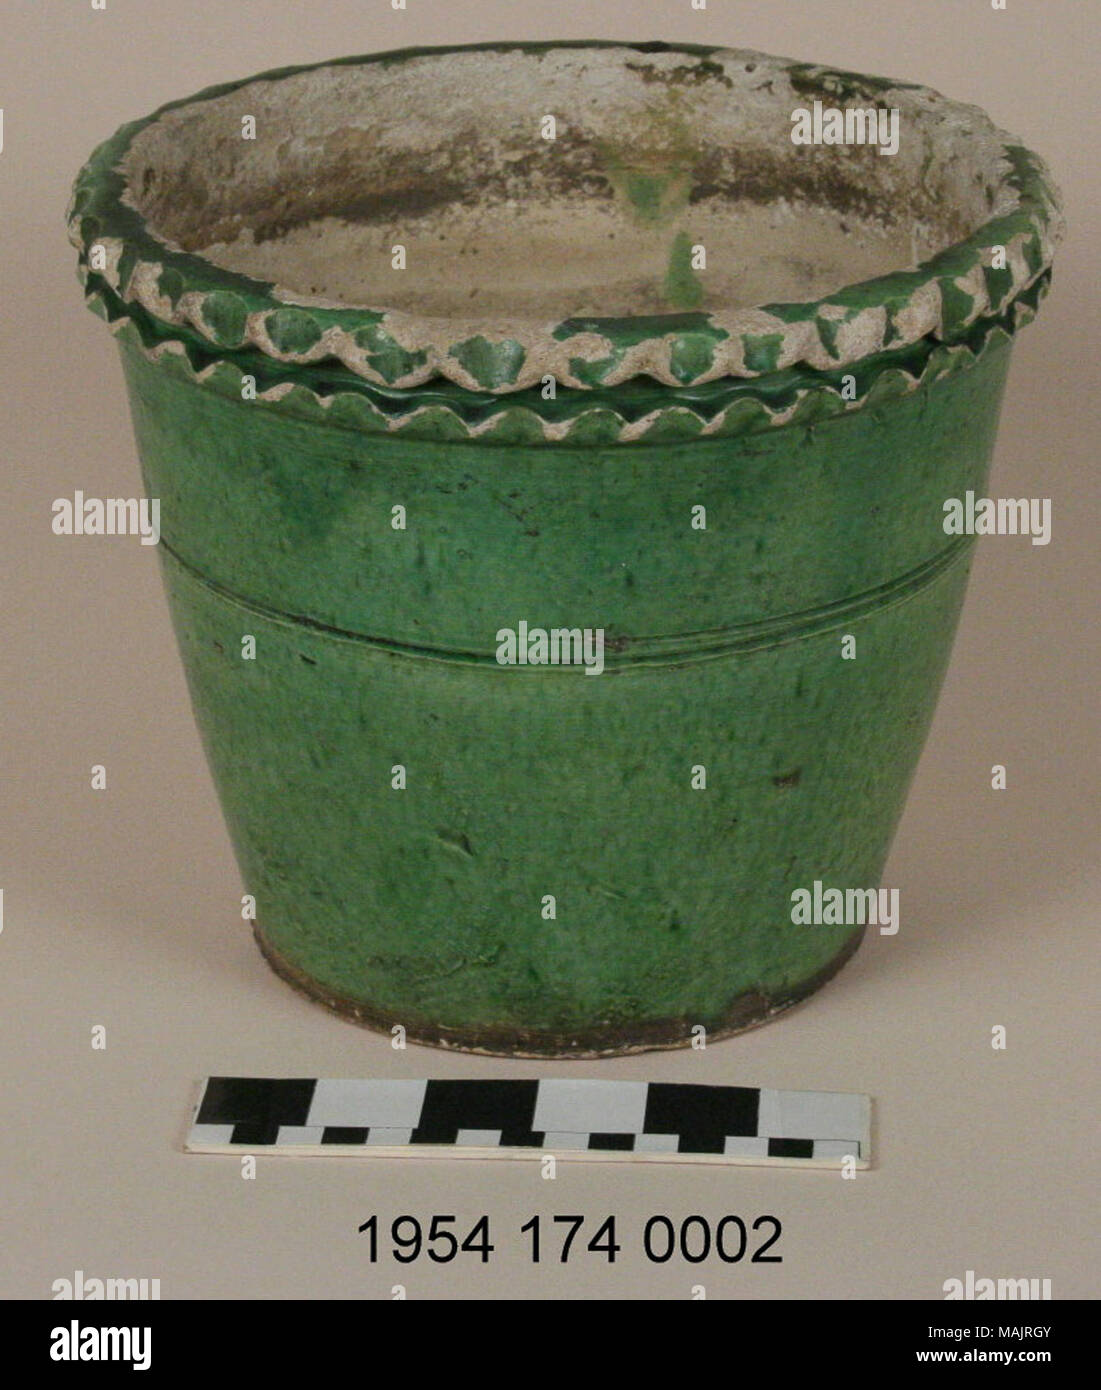 Green-glazed earthenware flowerpot, white clay glazed with green glaze. Rim has double scalloped decoration. Made by St. Charles potter Joseph Oser. Title: Earthenware Flowerpot Made by Joseph Oser  . circa 1870. Oser Pottery Stock Photo